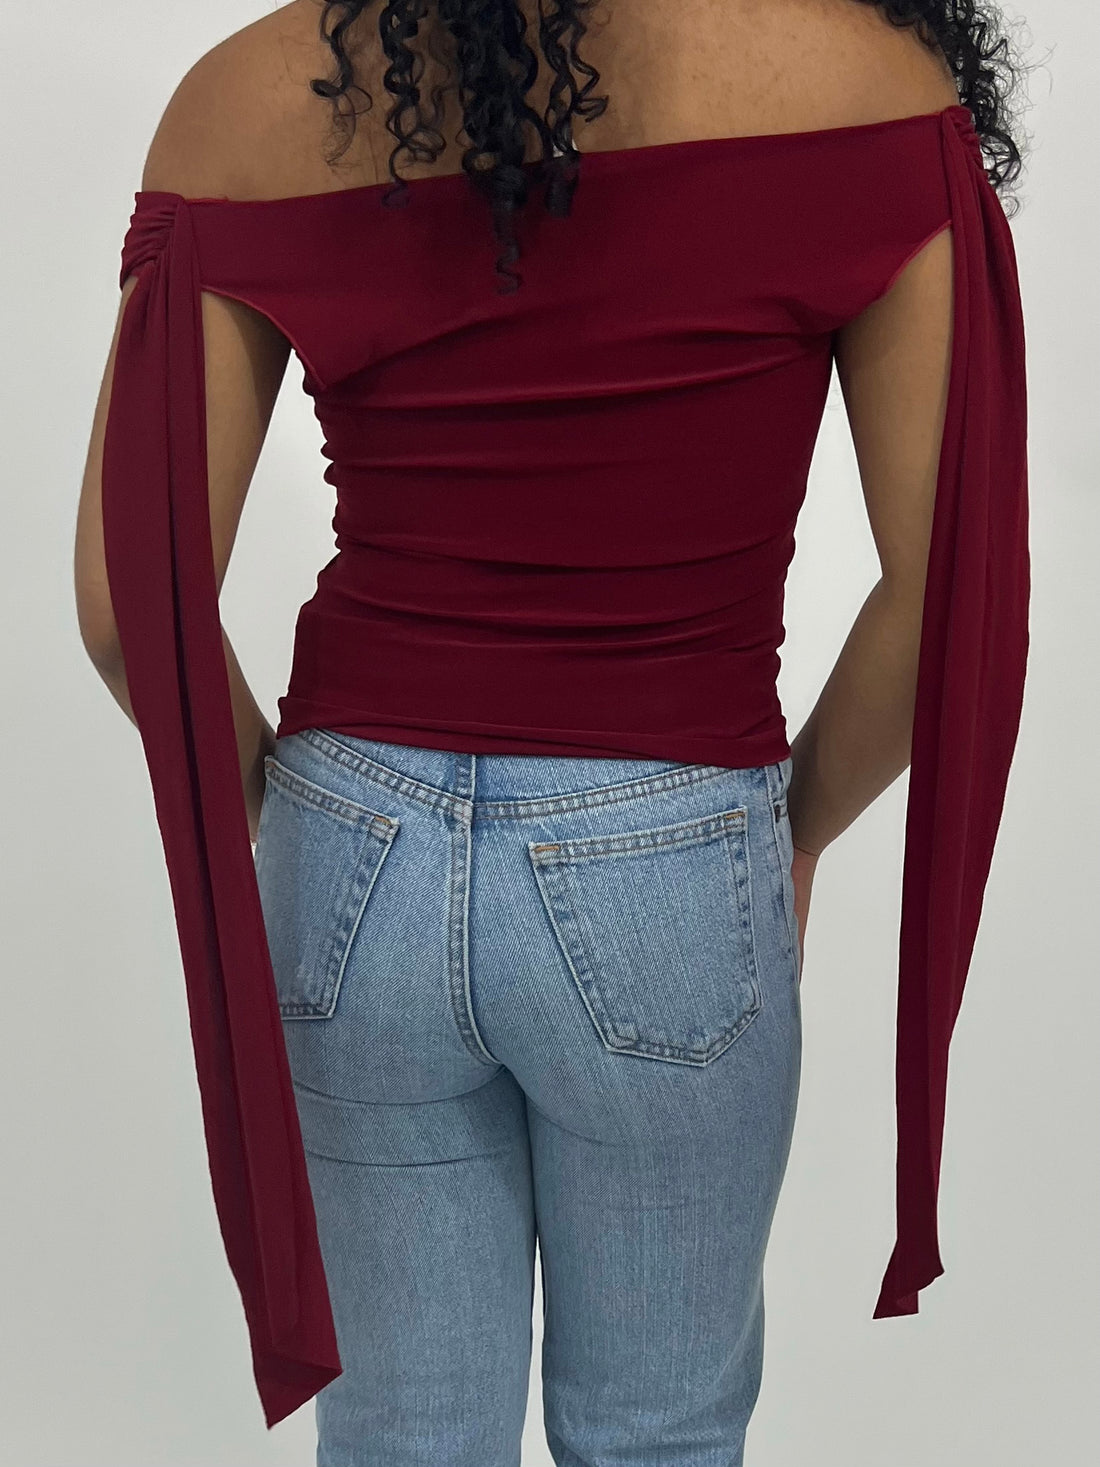 Off The Shoulder Draping Top (S-M)